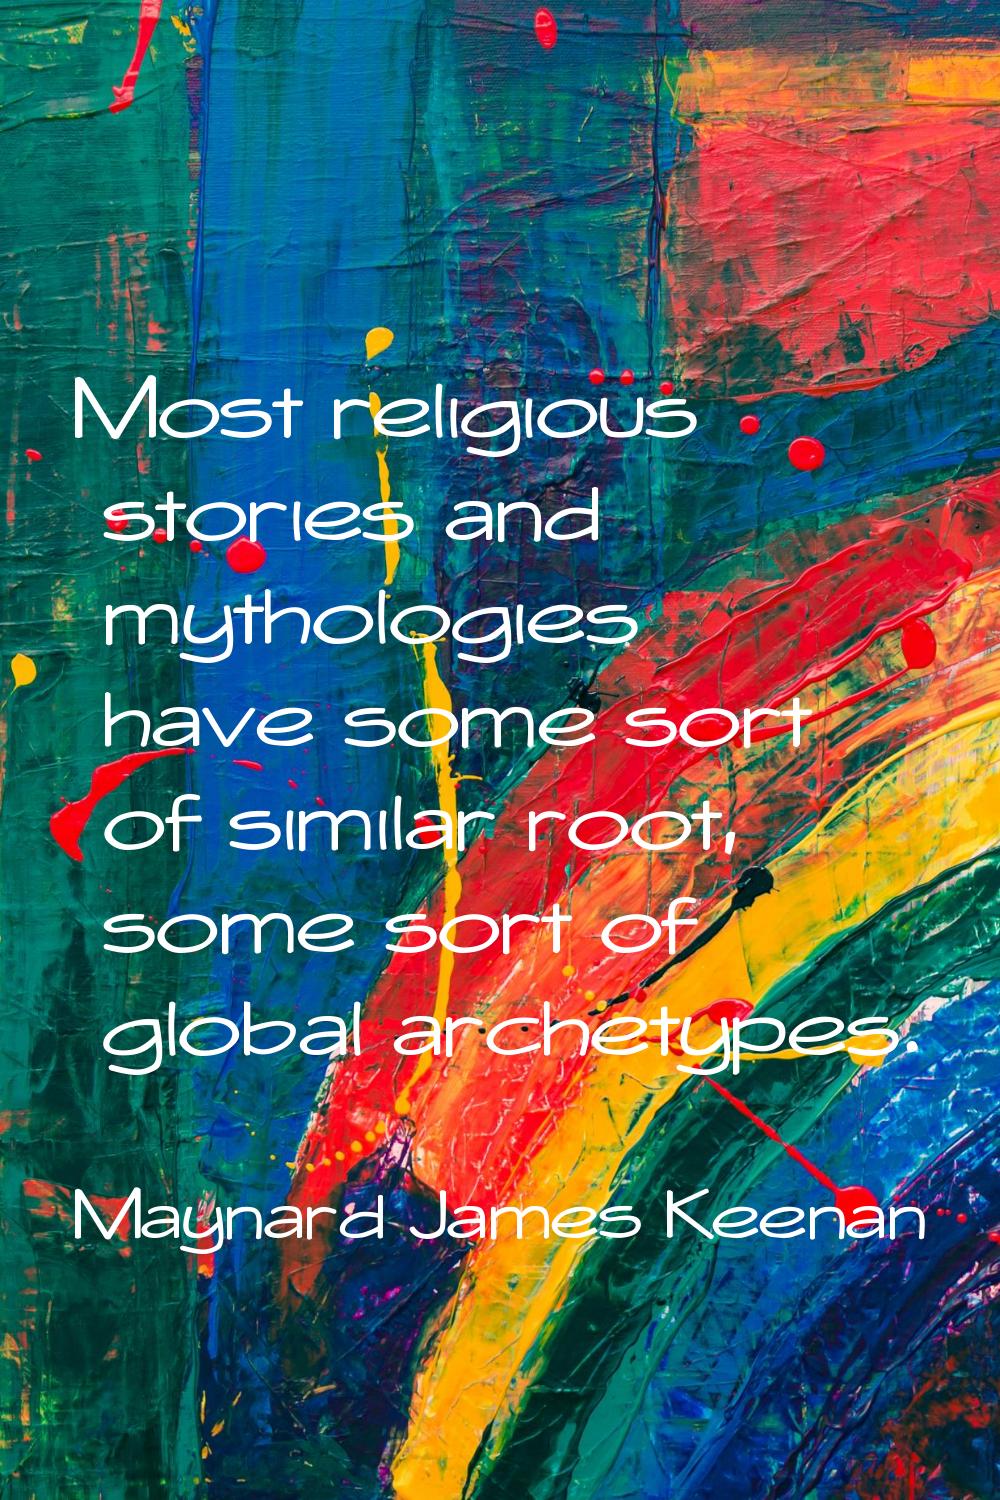 Most religious stories and mythologies have some sort of similar root, some sort of global archetyp